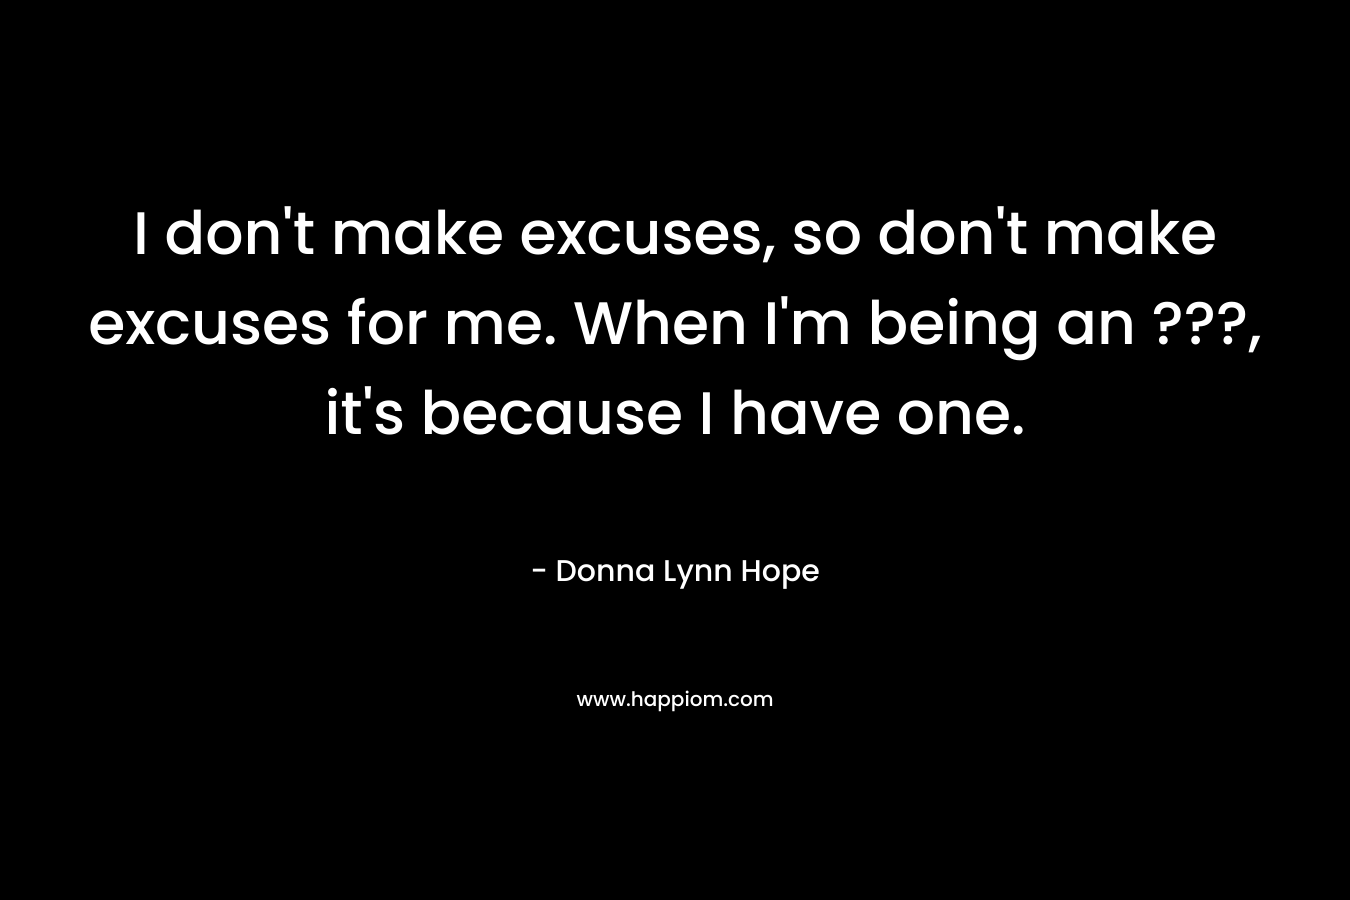 I don't make excuses, so don't make excuses for me. When I'm being an ???, it's because I have one.